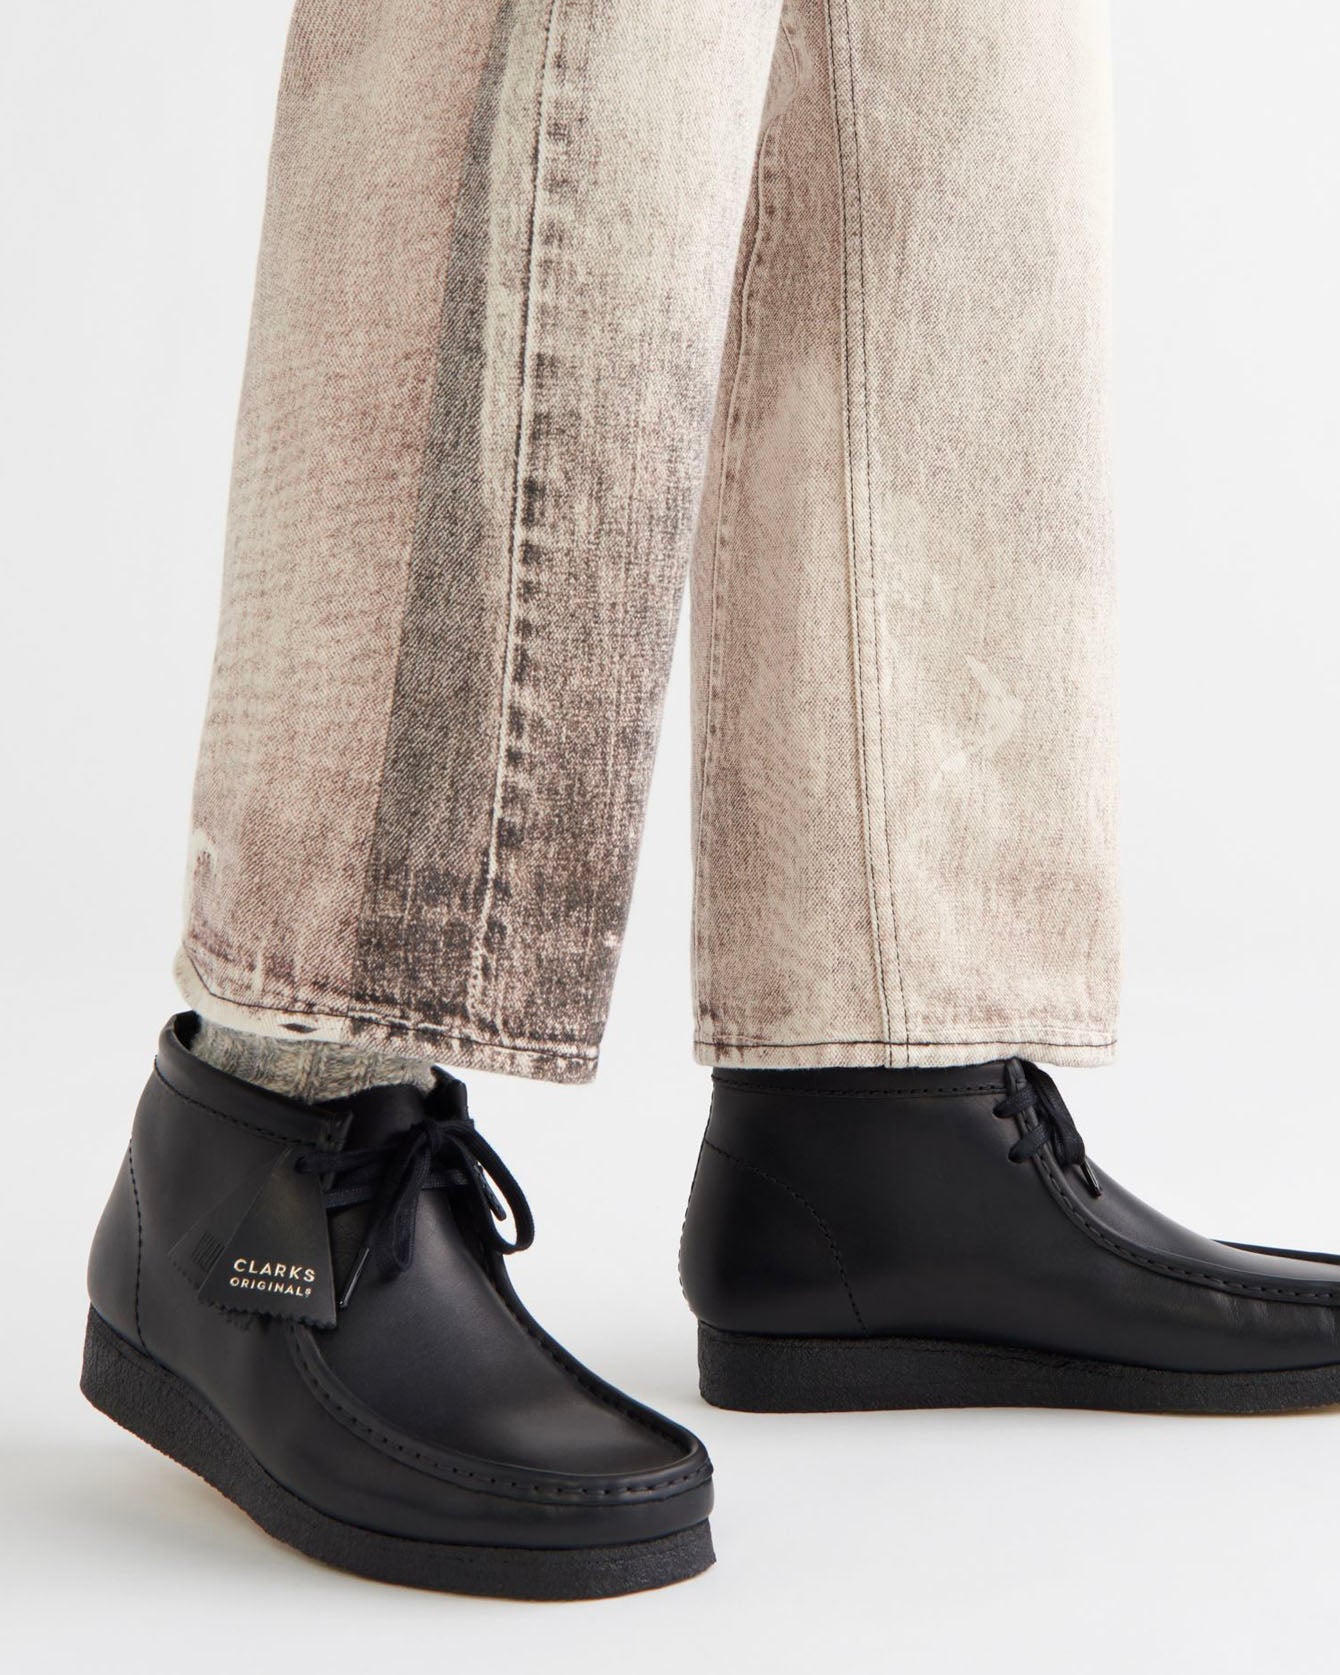 Wallabee Boot - Black Leather